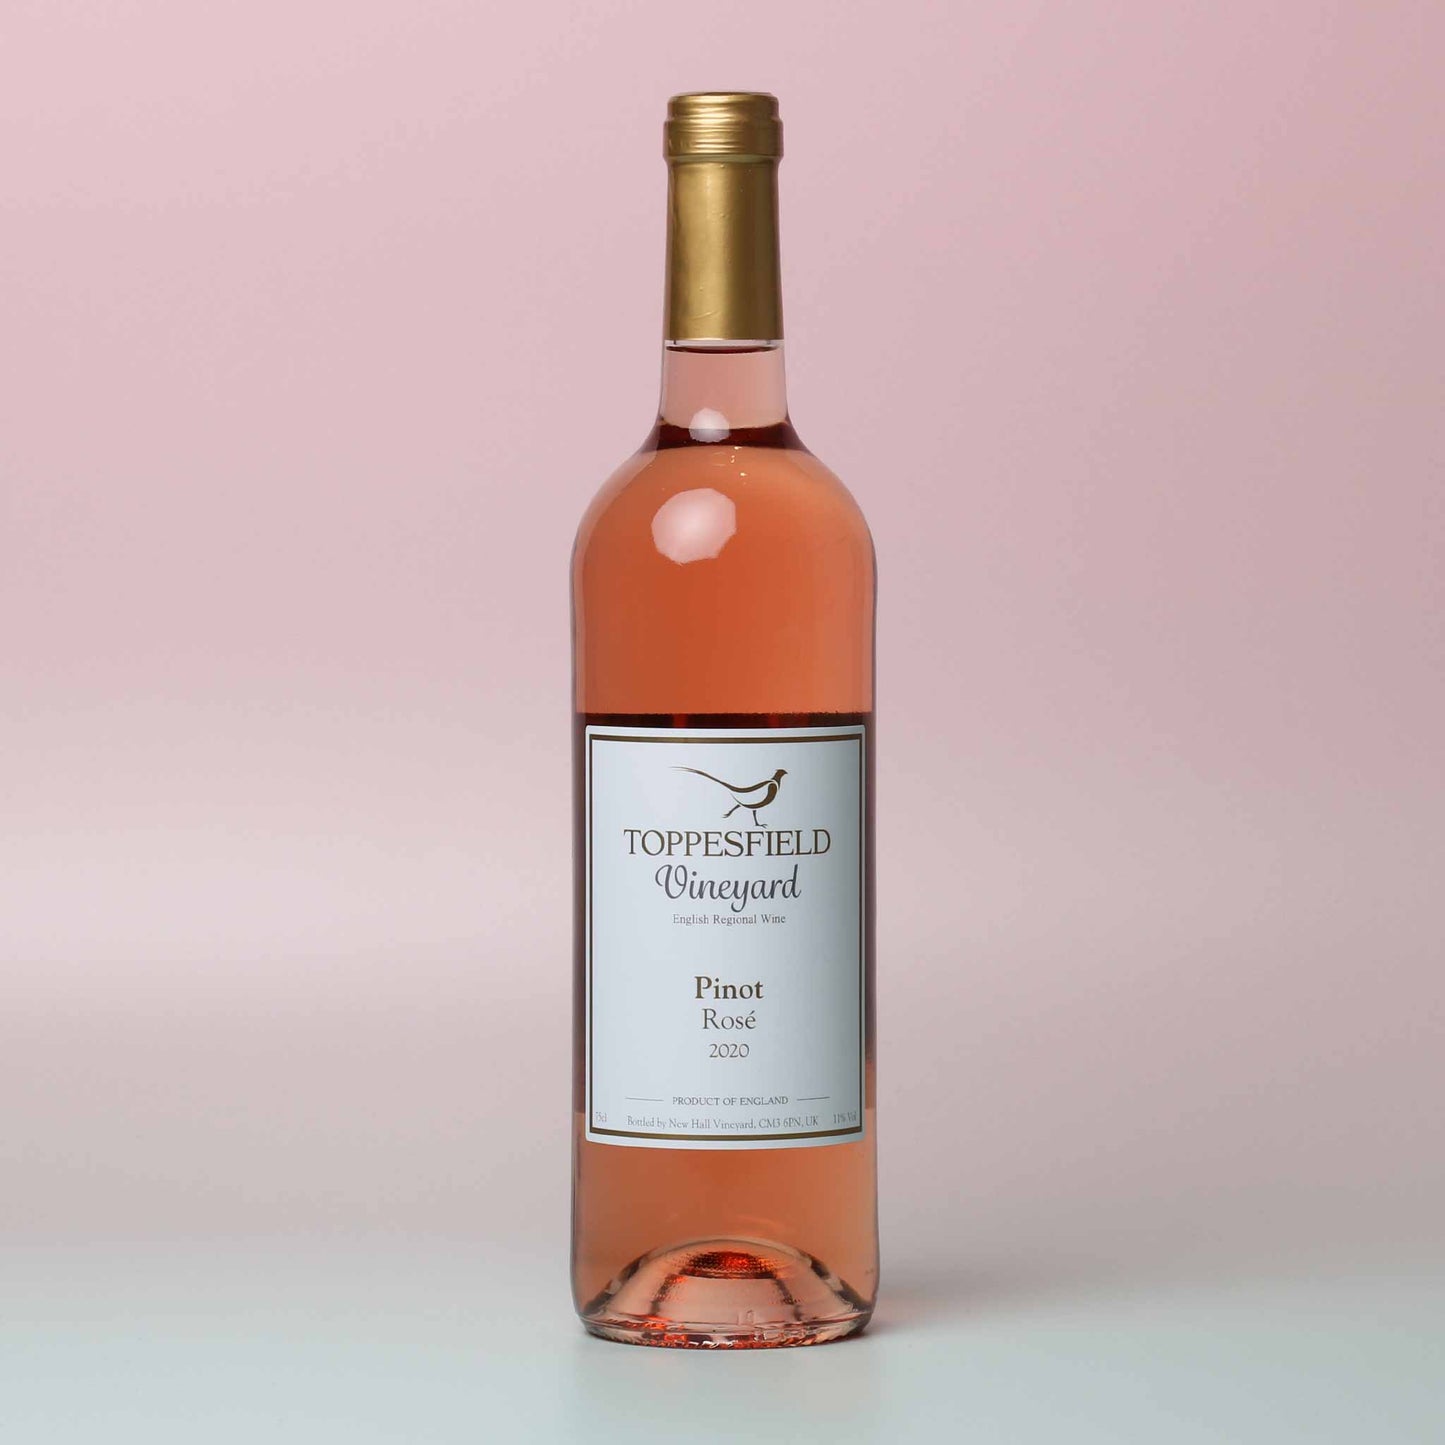 Toppesfield Pinot Rosé is a dry, Provençal style rosé with hints of English strawberries and citrus